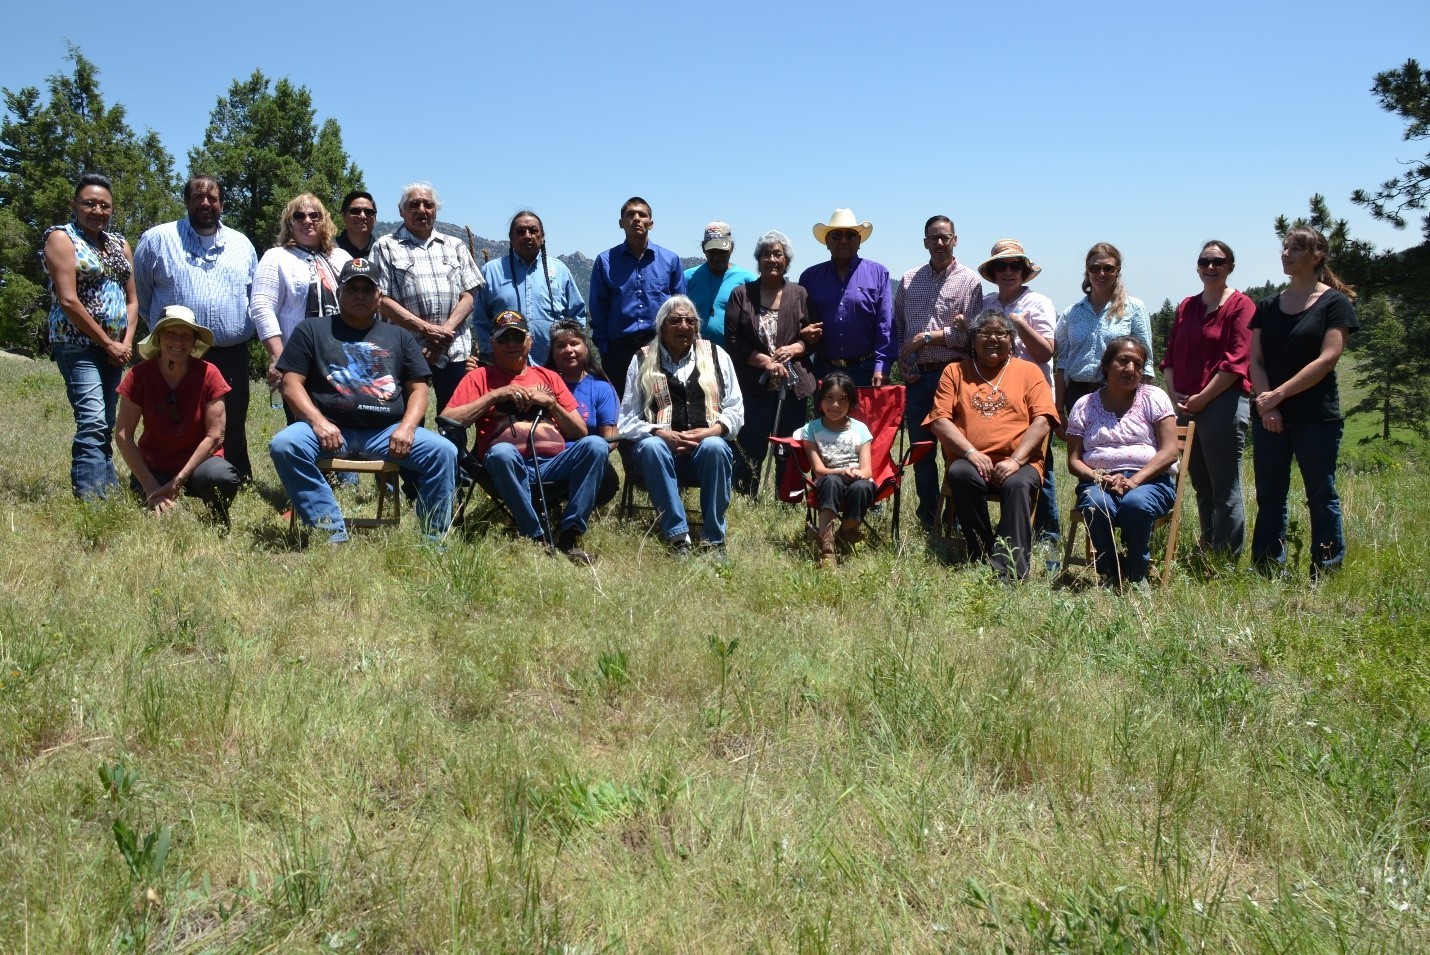 Two rows of people posed for a photo in a grassy field with the front row sitting in chairs or kneeling in front of those that are standing.